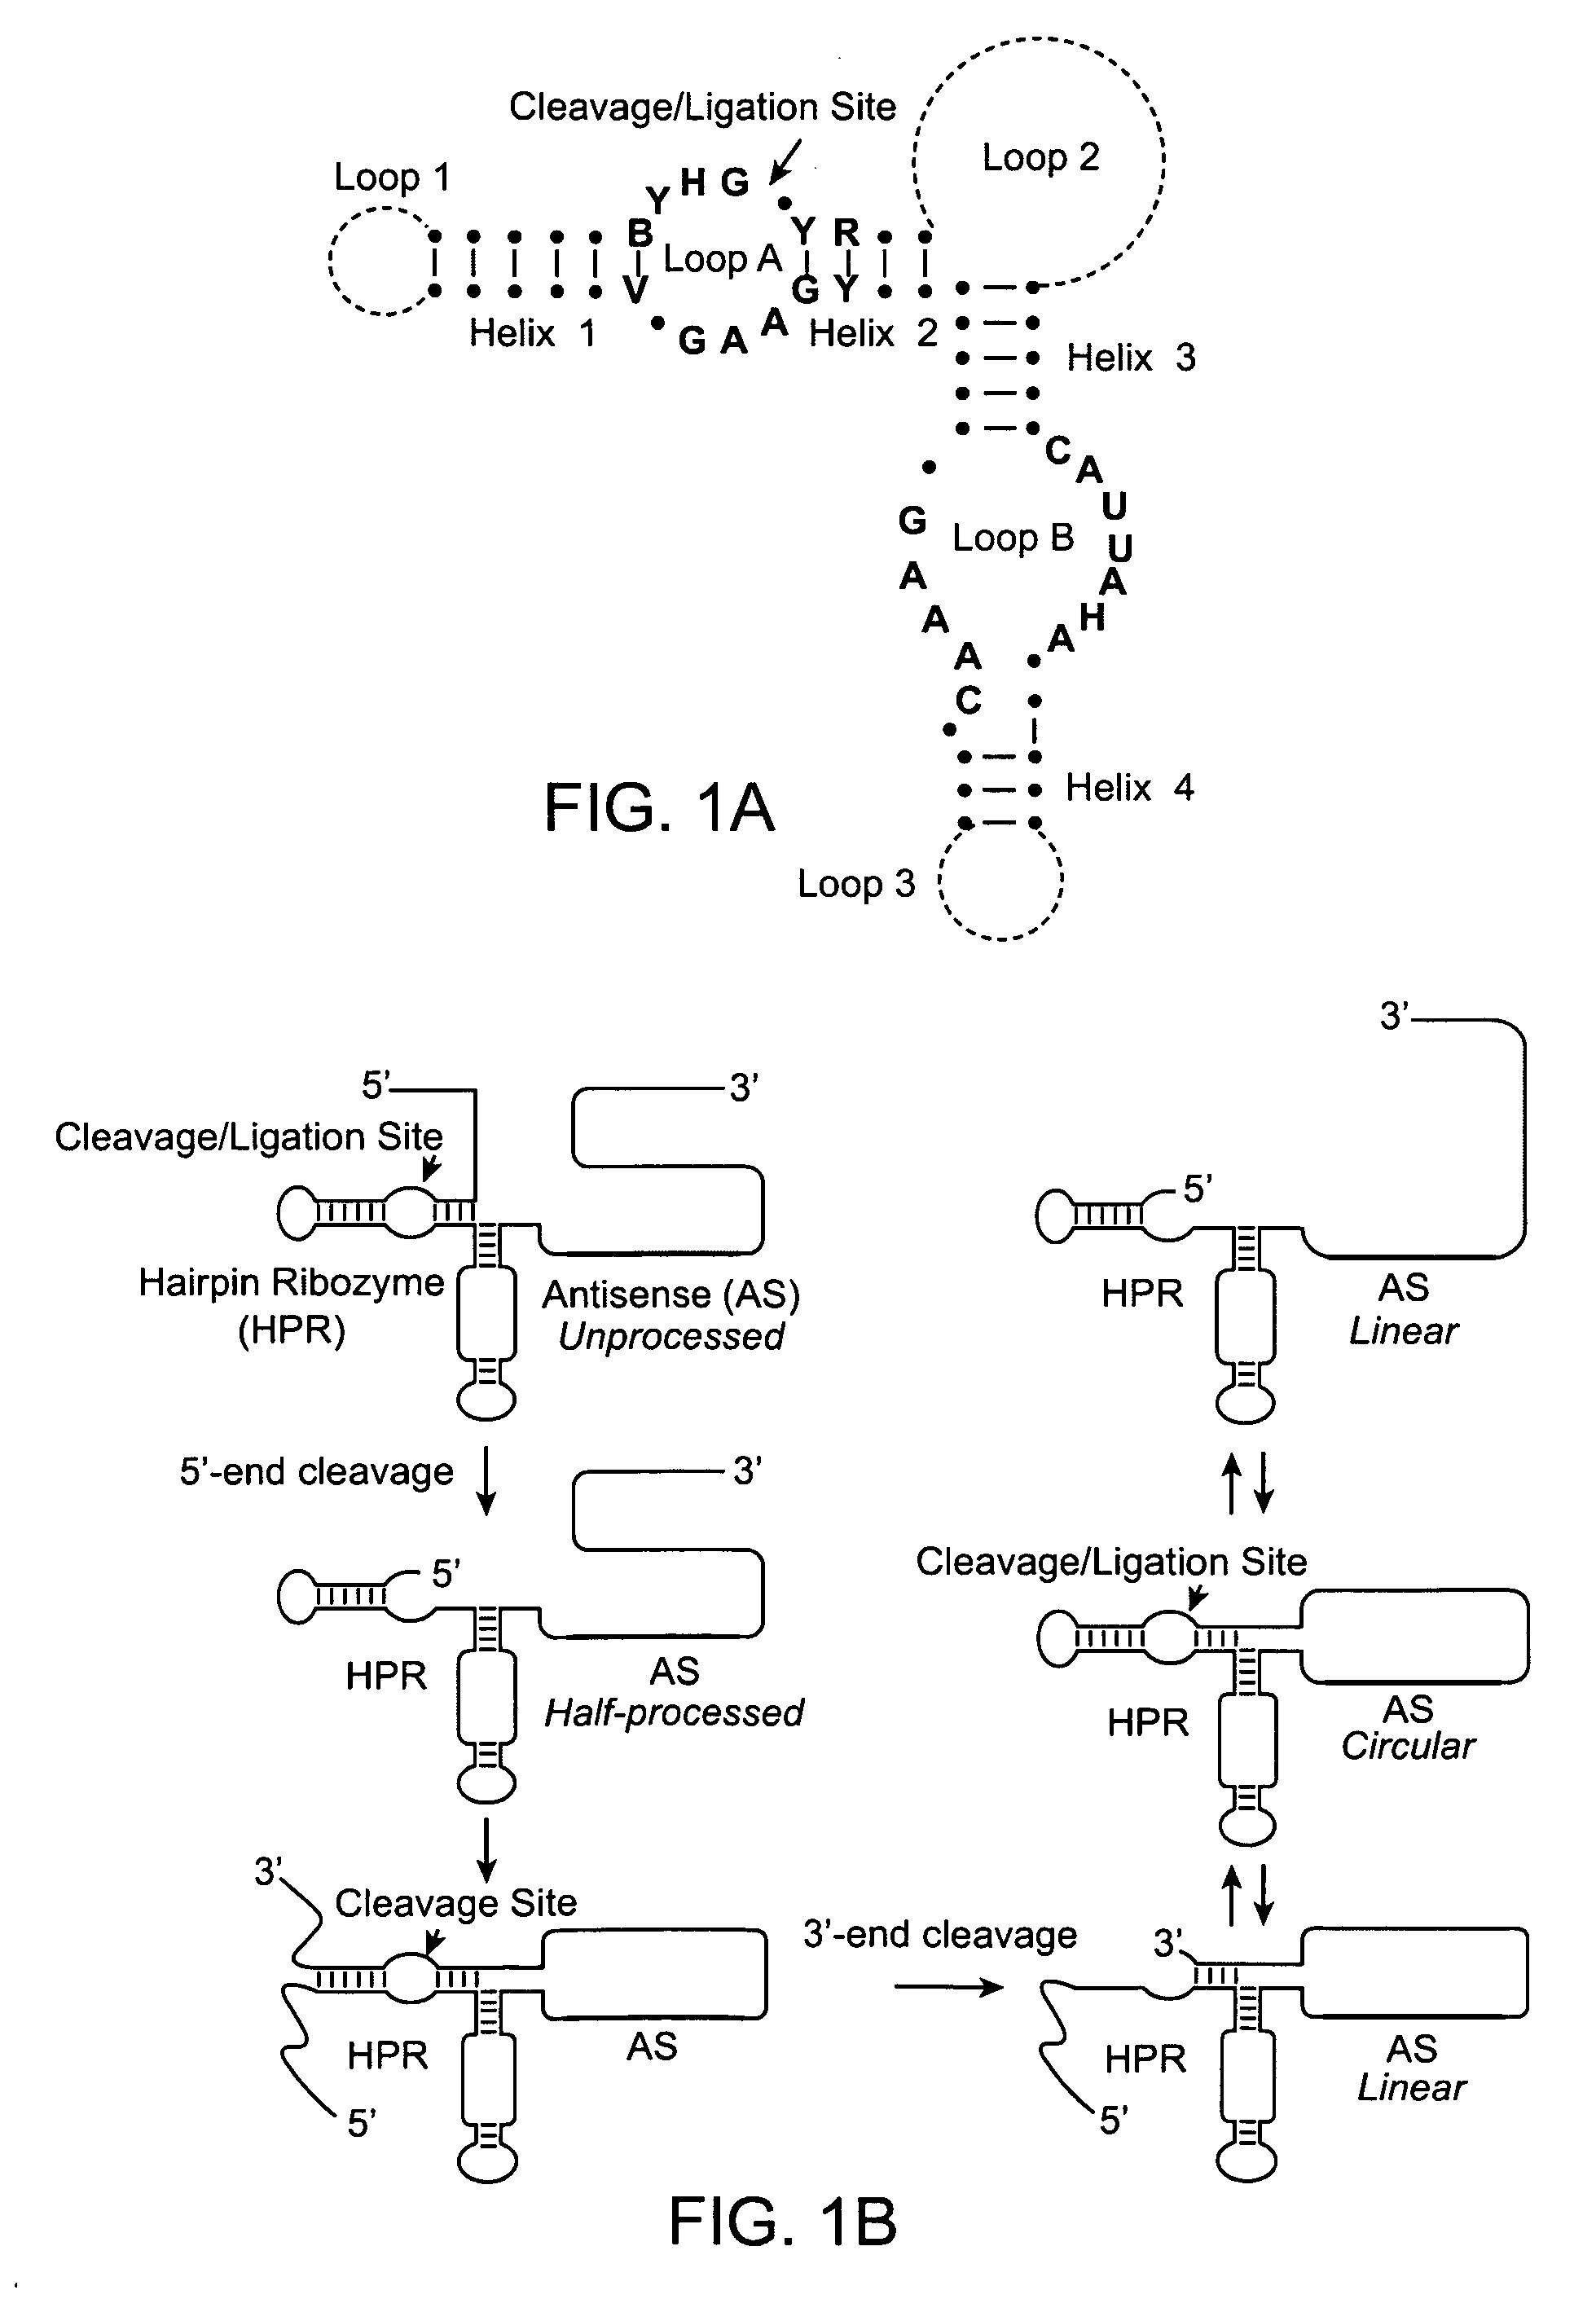 Superior hybridization probes and methods for their use in detection of polynucleotide targets